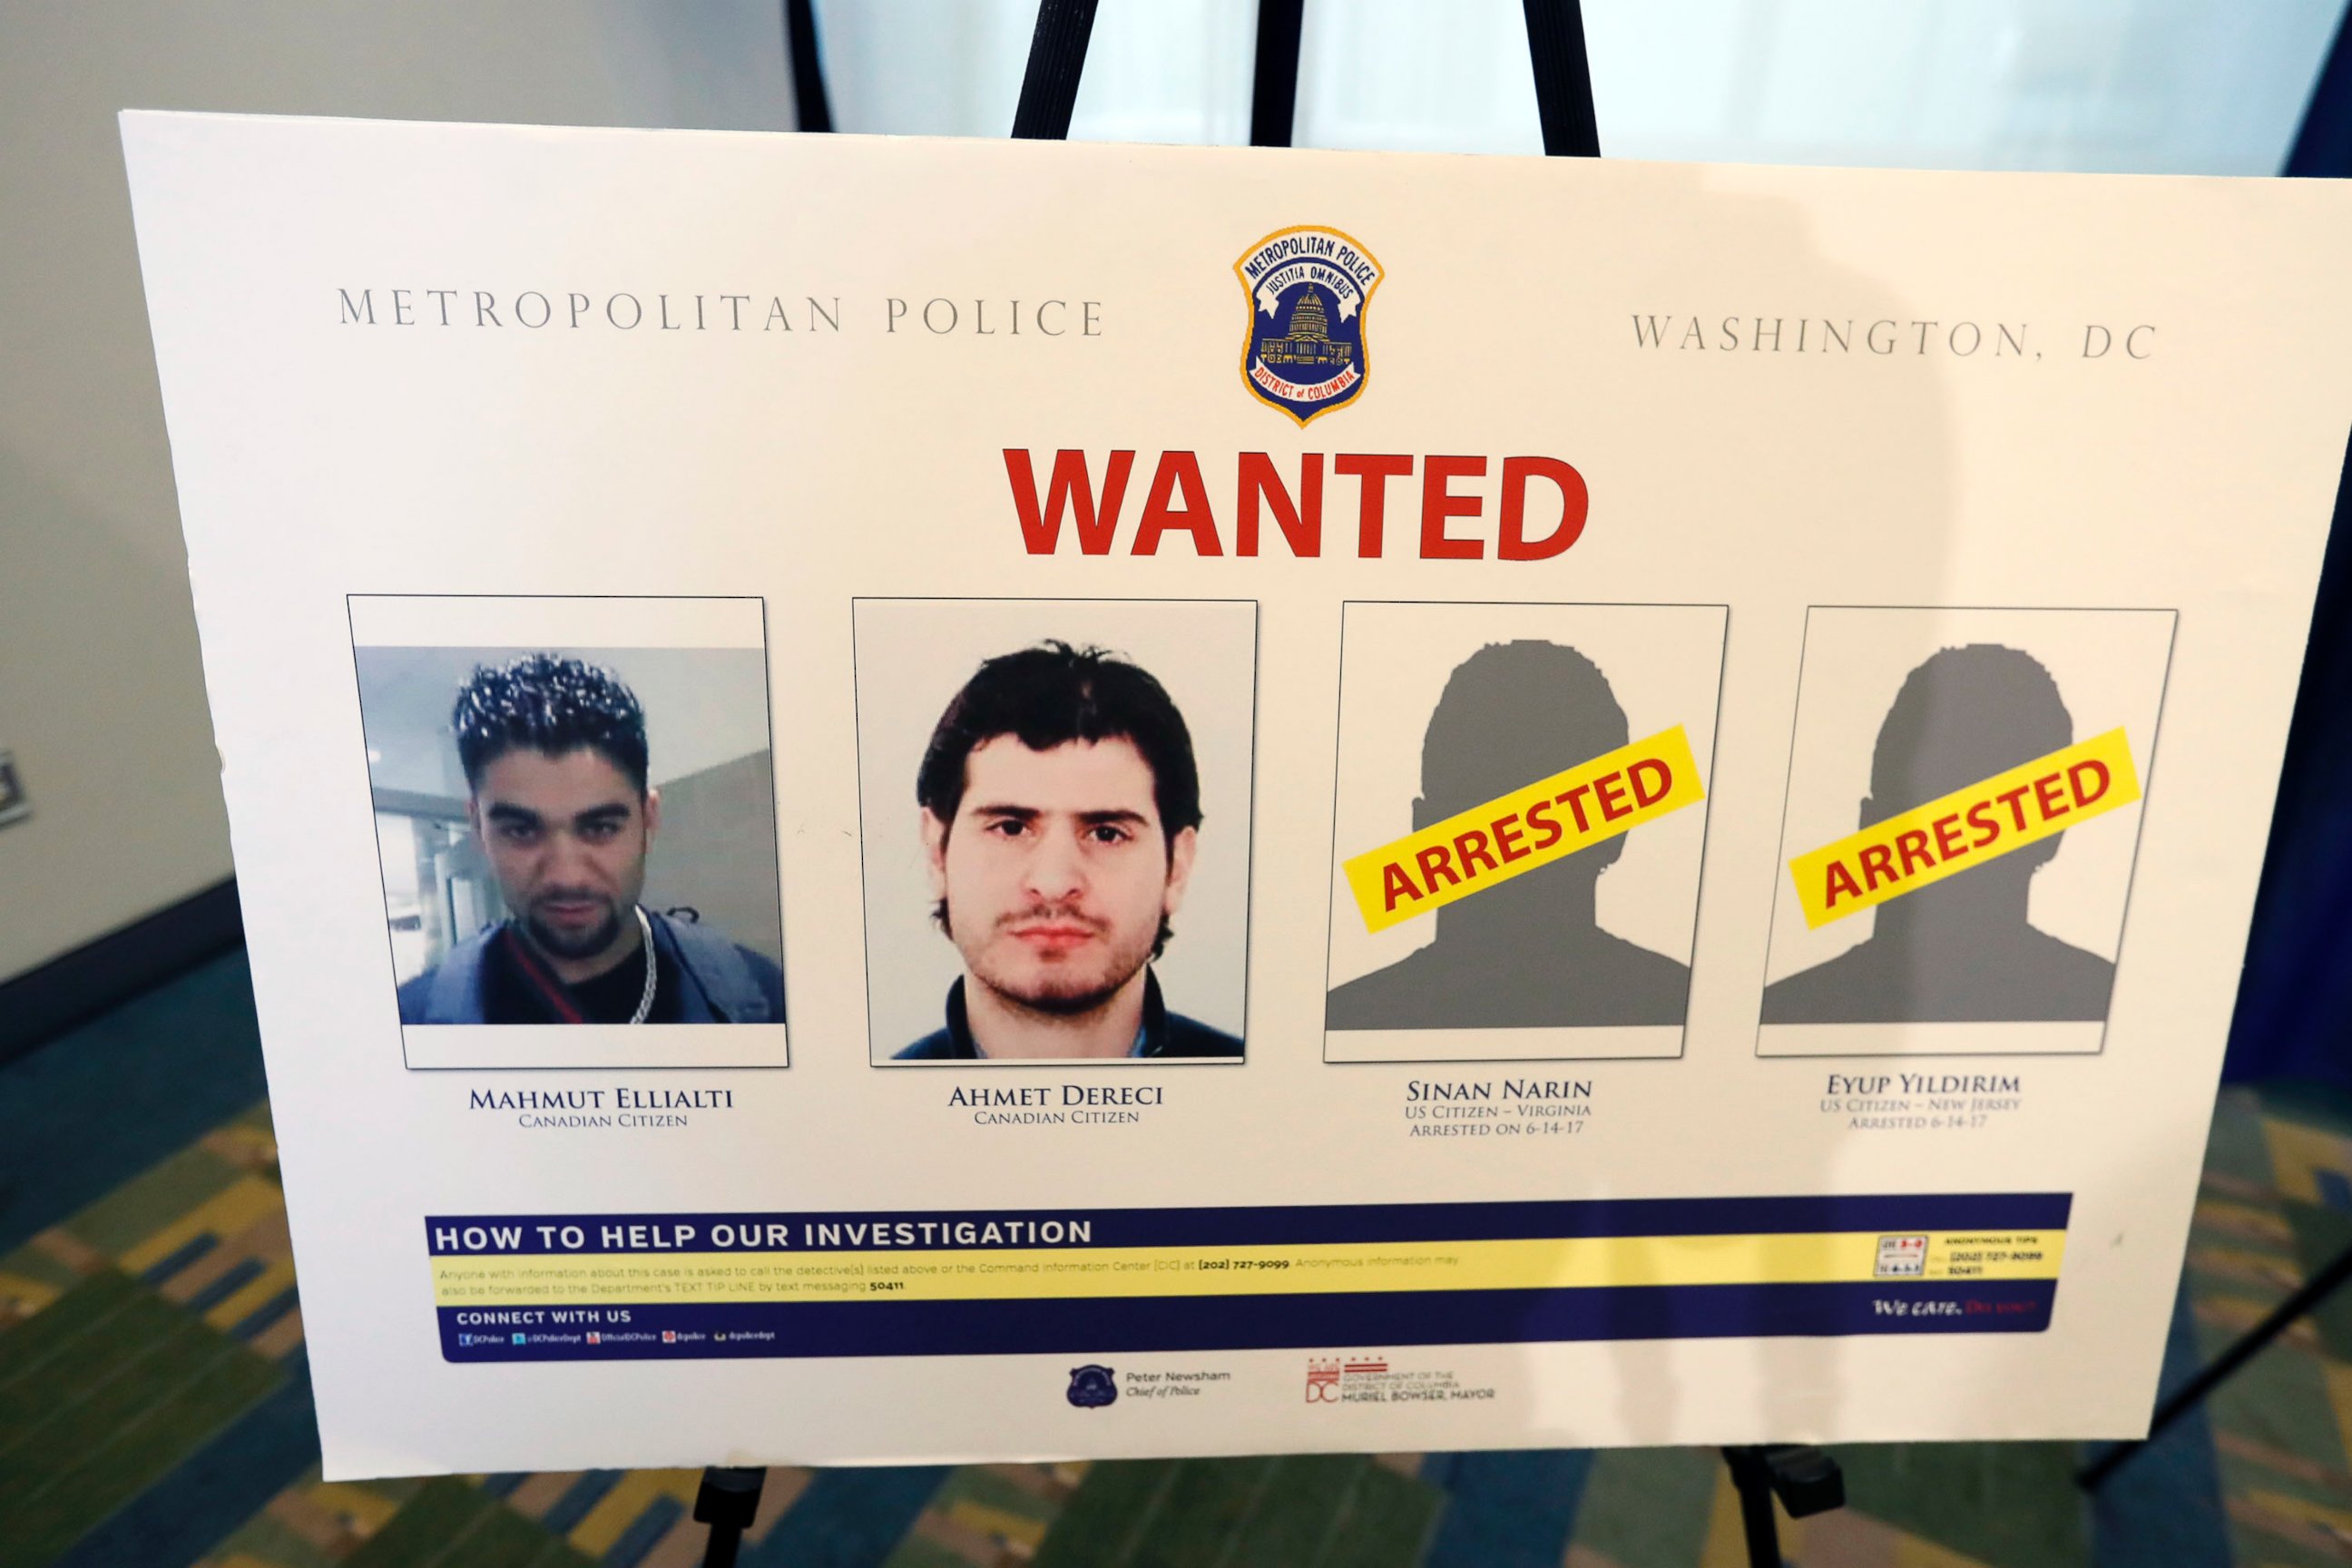 PHOTO: A wanted poster is displayed at a news conference in Washington, D.C., June 15, 2017, during an announcement about arrest warrants in the May 16, 2017, altercation outside the Turkish Embassy. 